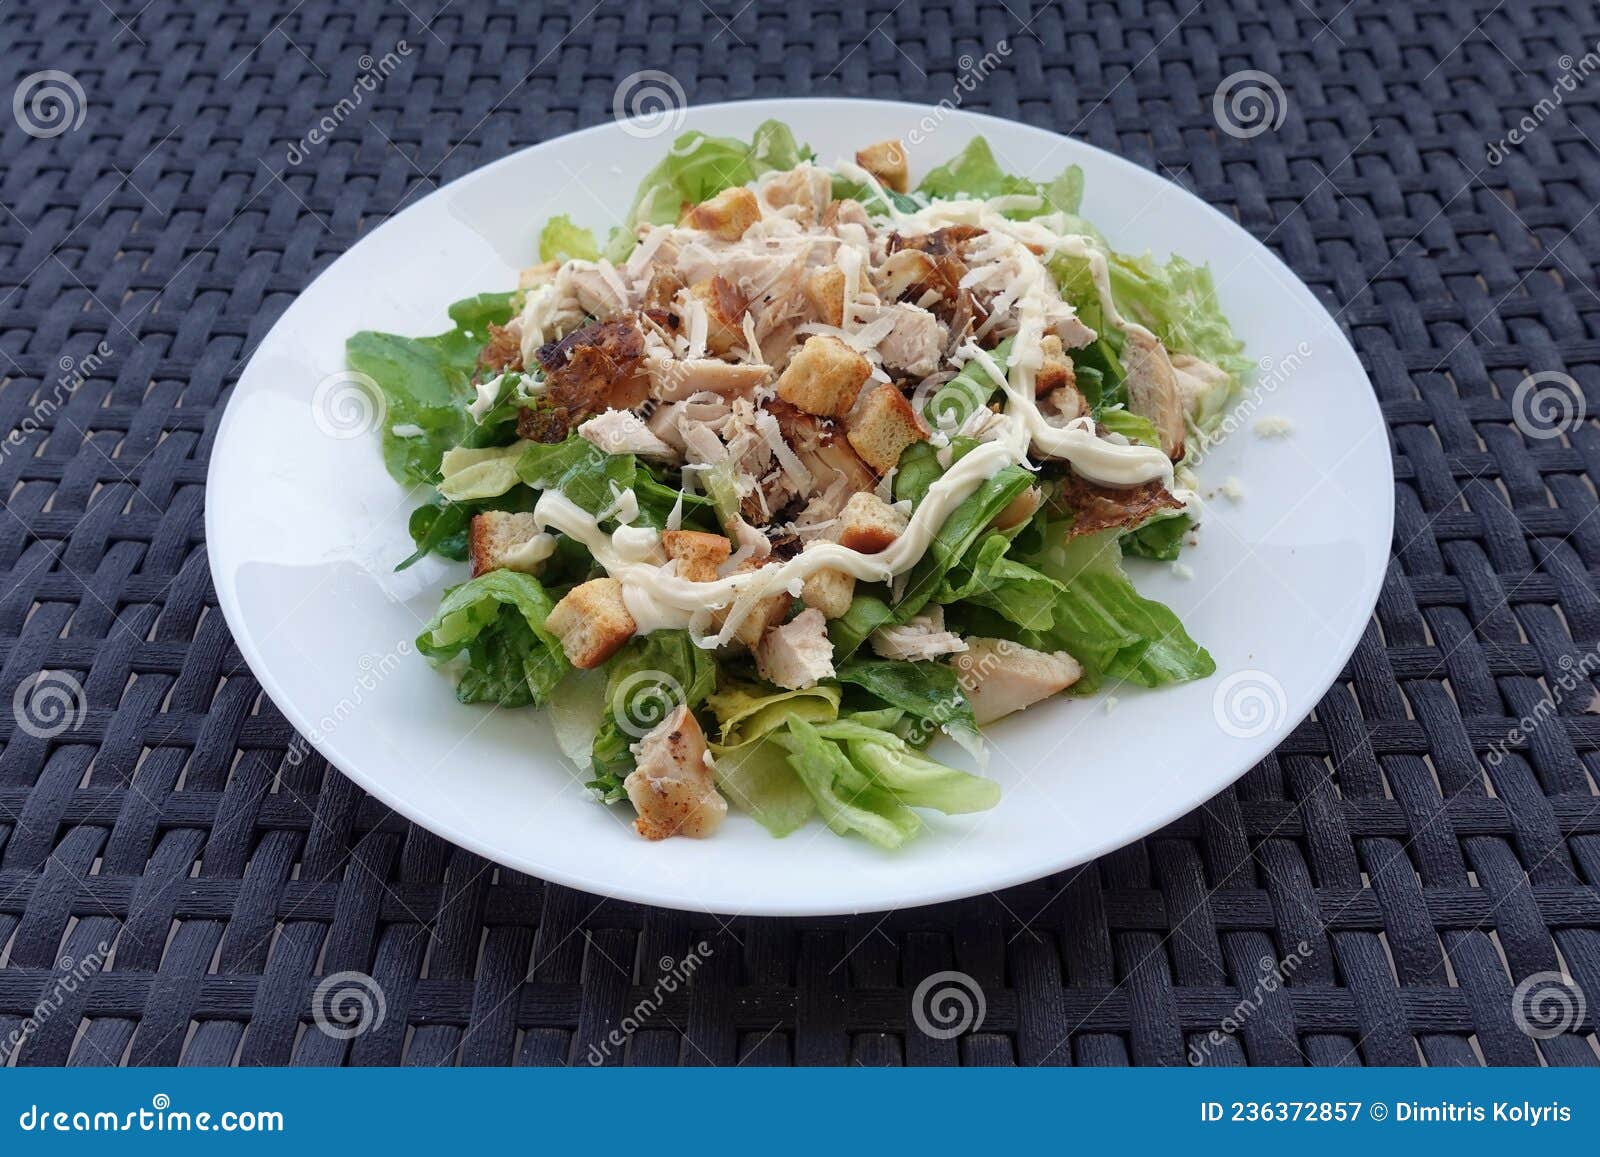 caesars salad with grilled chicken lettuce and croutons